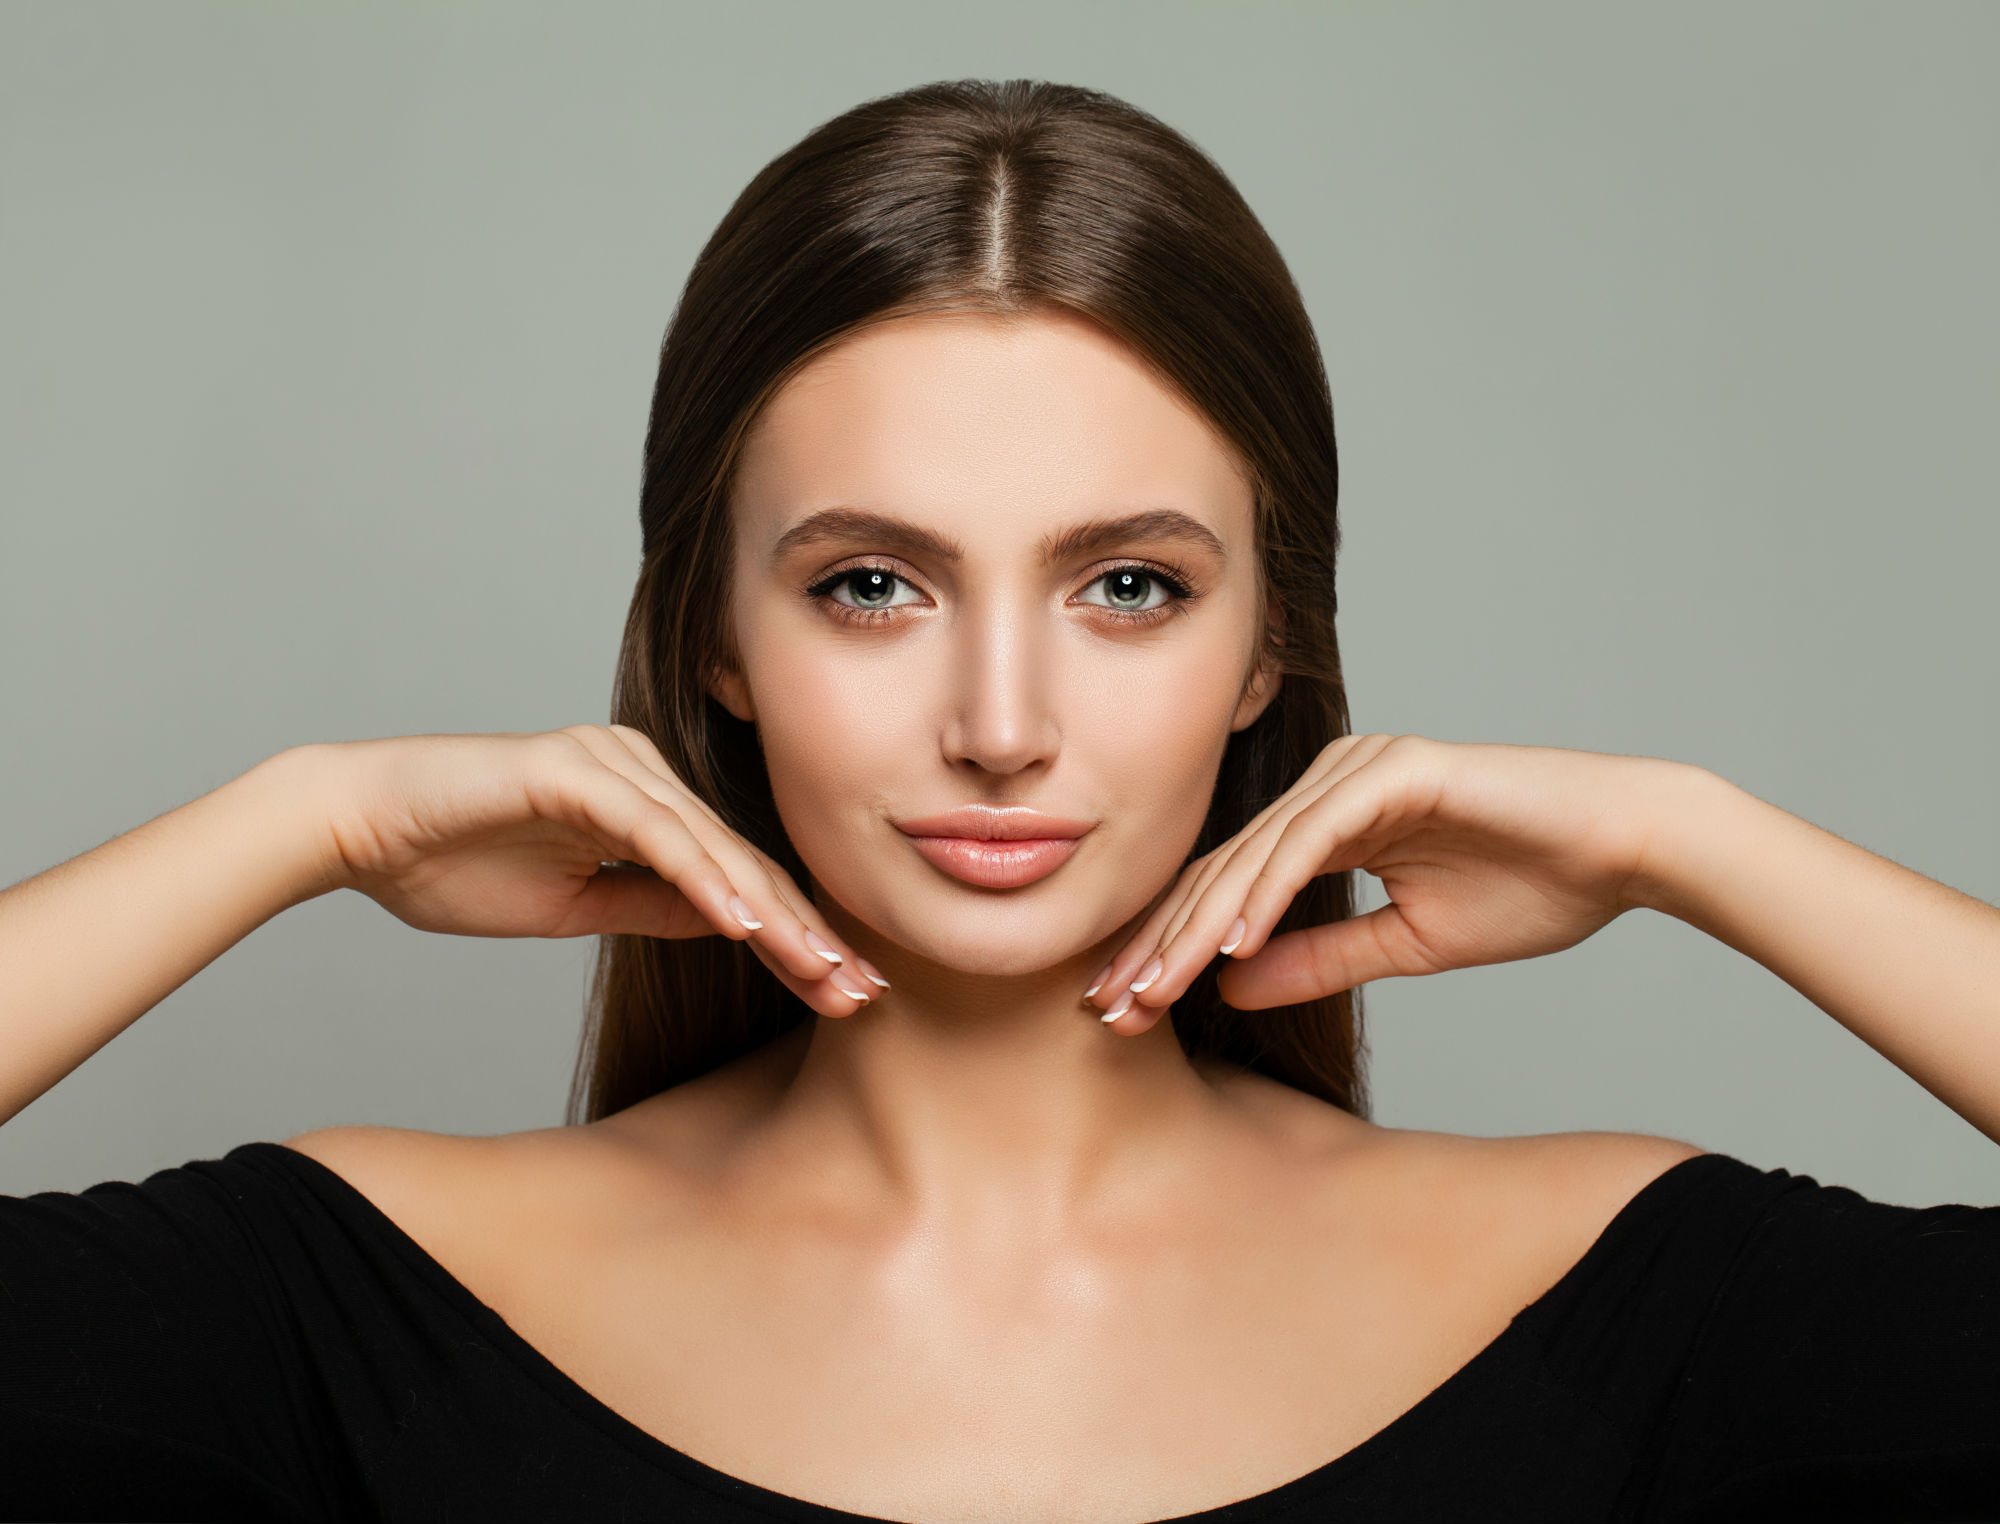 If you’re looking for v shape face treatment in Singapore, then look no further than Only Aesthetics